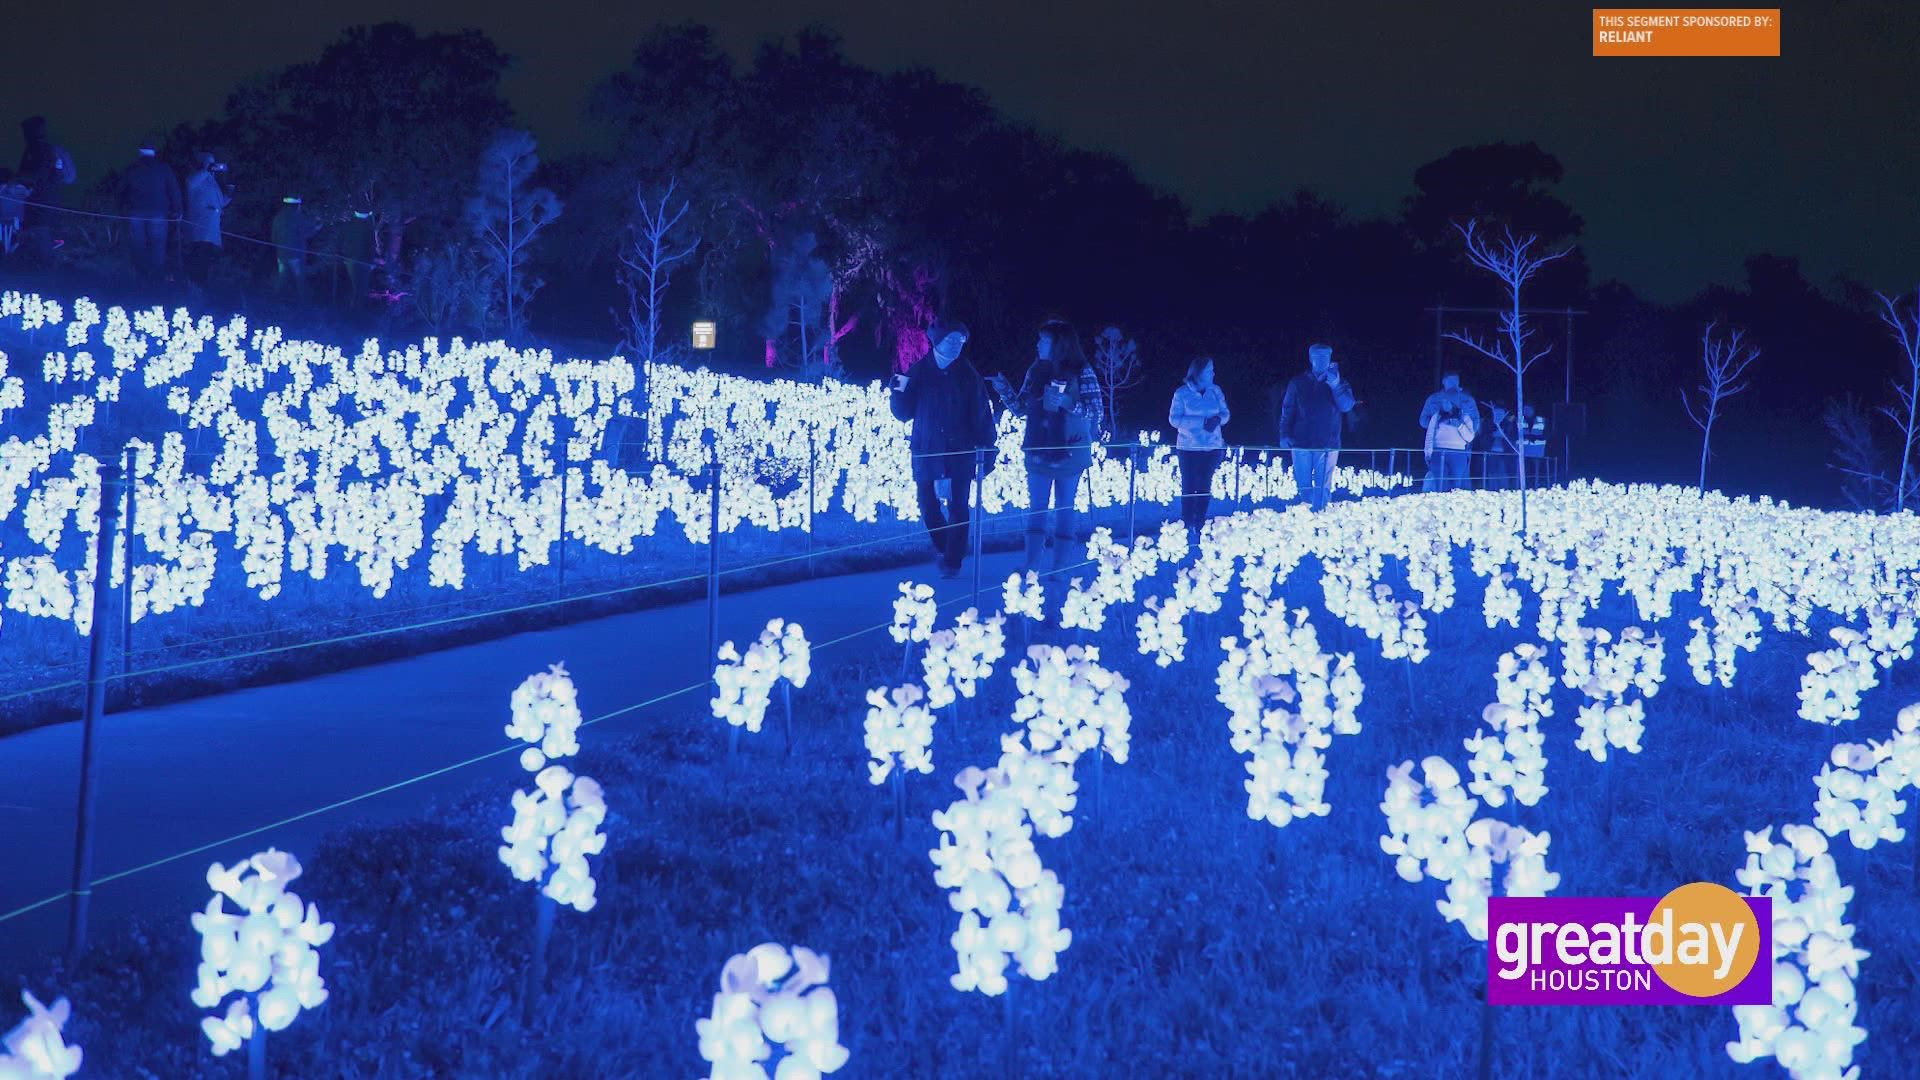 Get in the holiday spirit with two special events presented by Reliant. Lightscape at the Houston Botanic Garden and Galaxy of Lights at Space Center Houston.